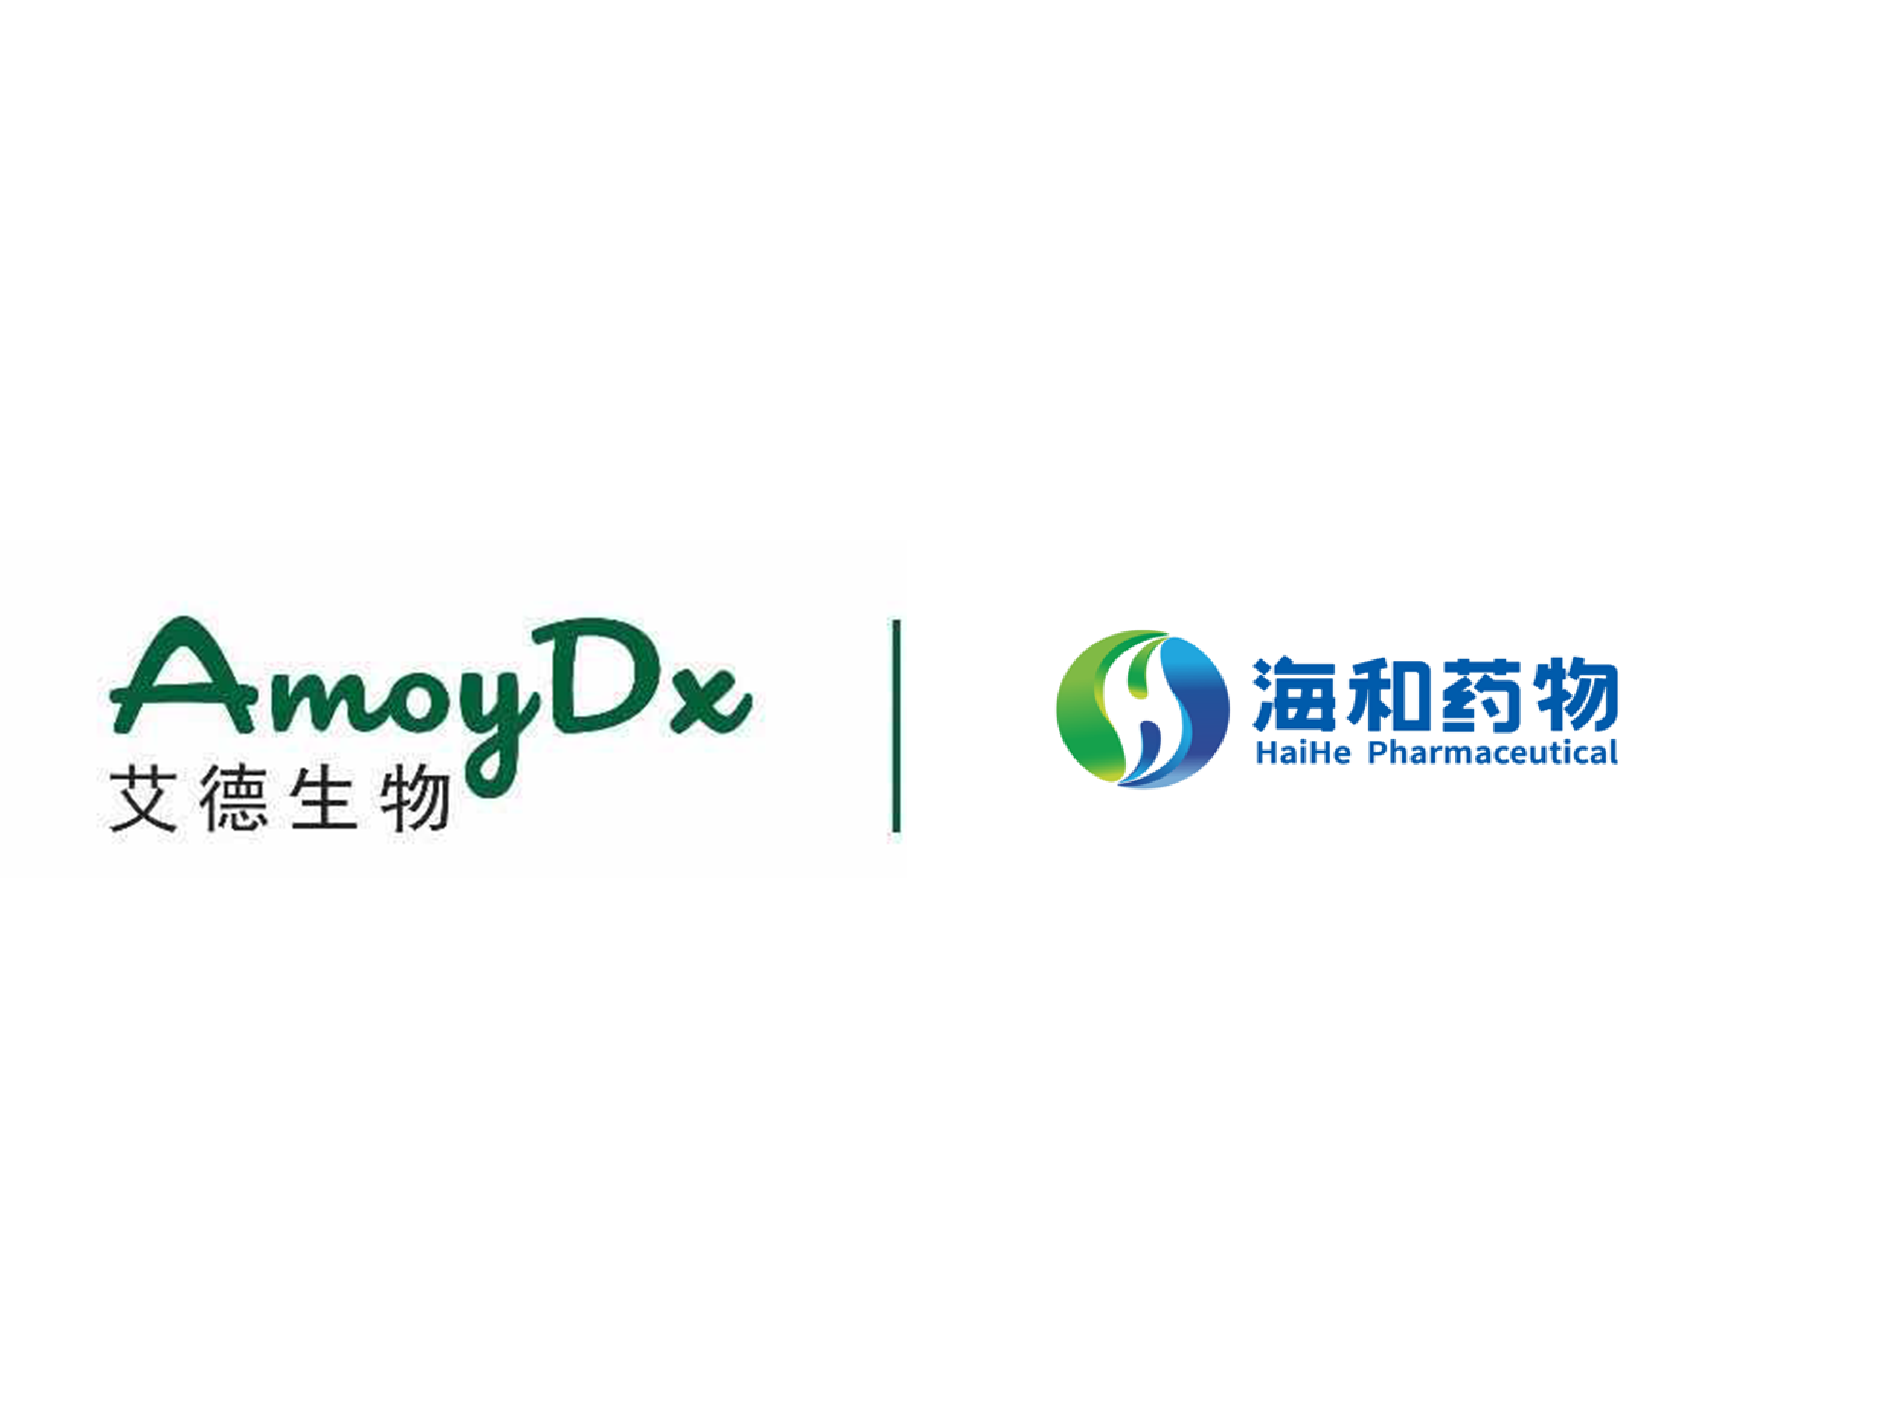 AmoyDx Collaborates with Haihe Pharmaceutical to Codevelop Companion Diagnostics for Japan Market